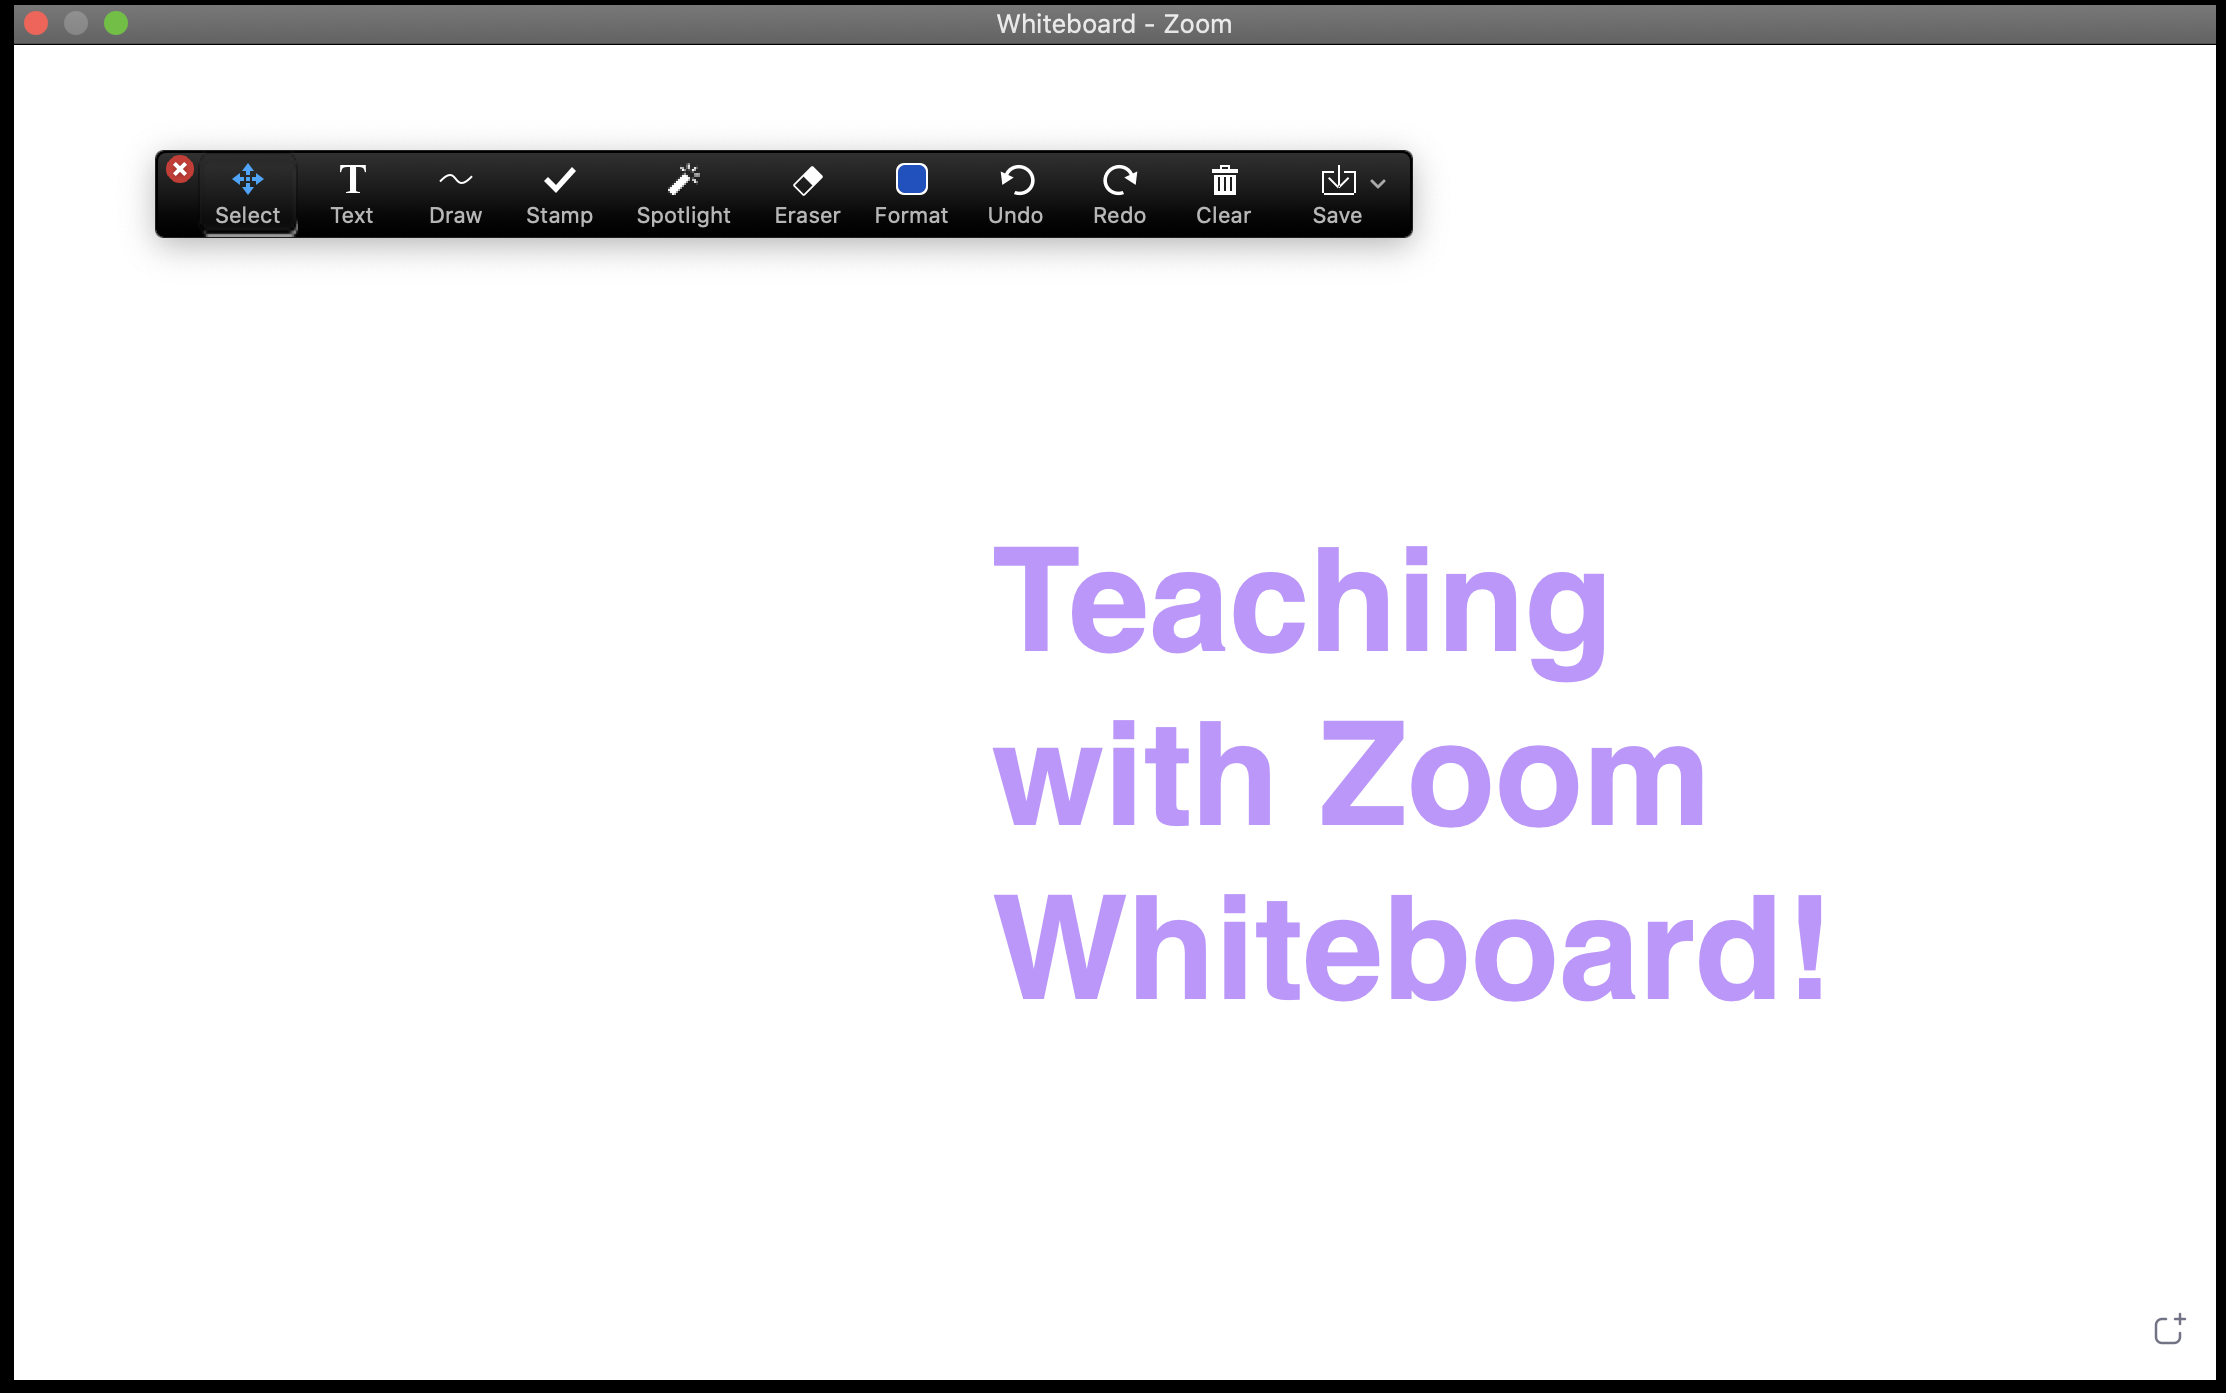 All You Need to Know to Get Started with Zoom Whiteboard - Duke